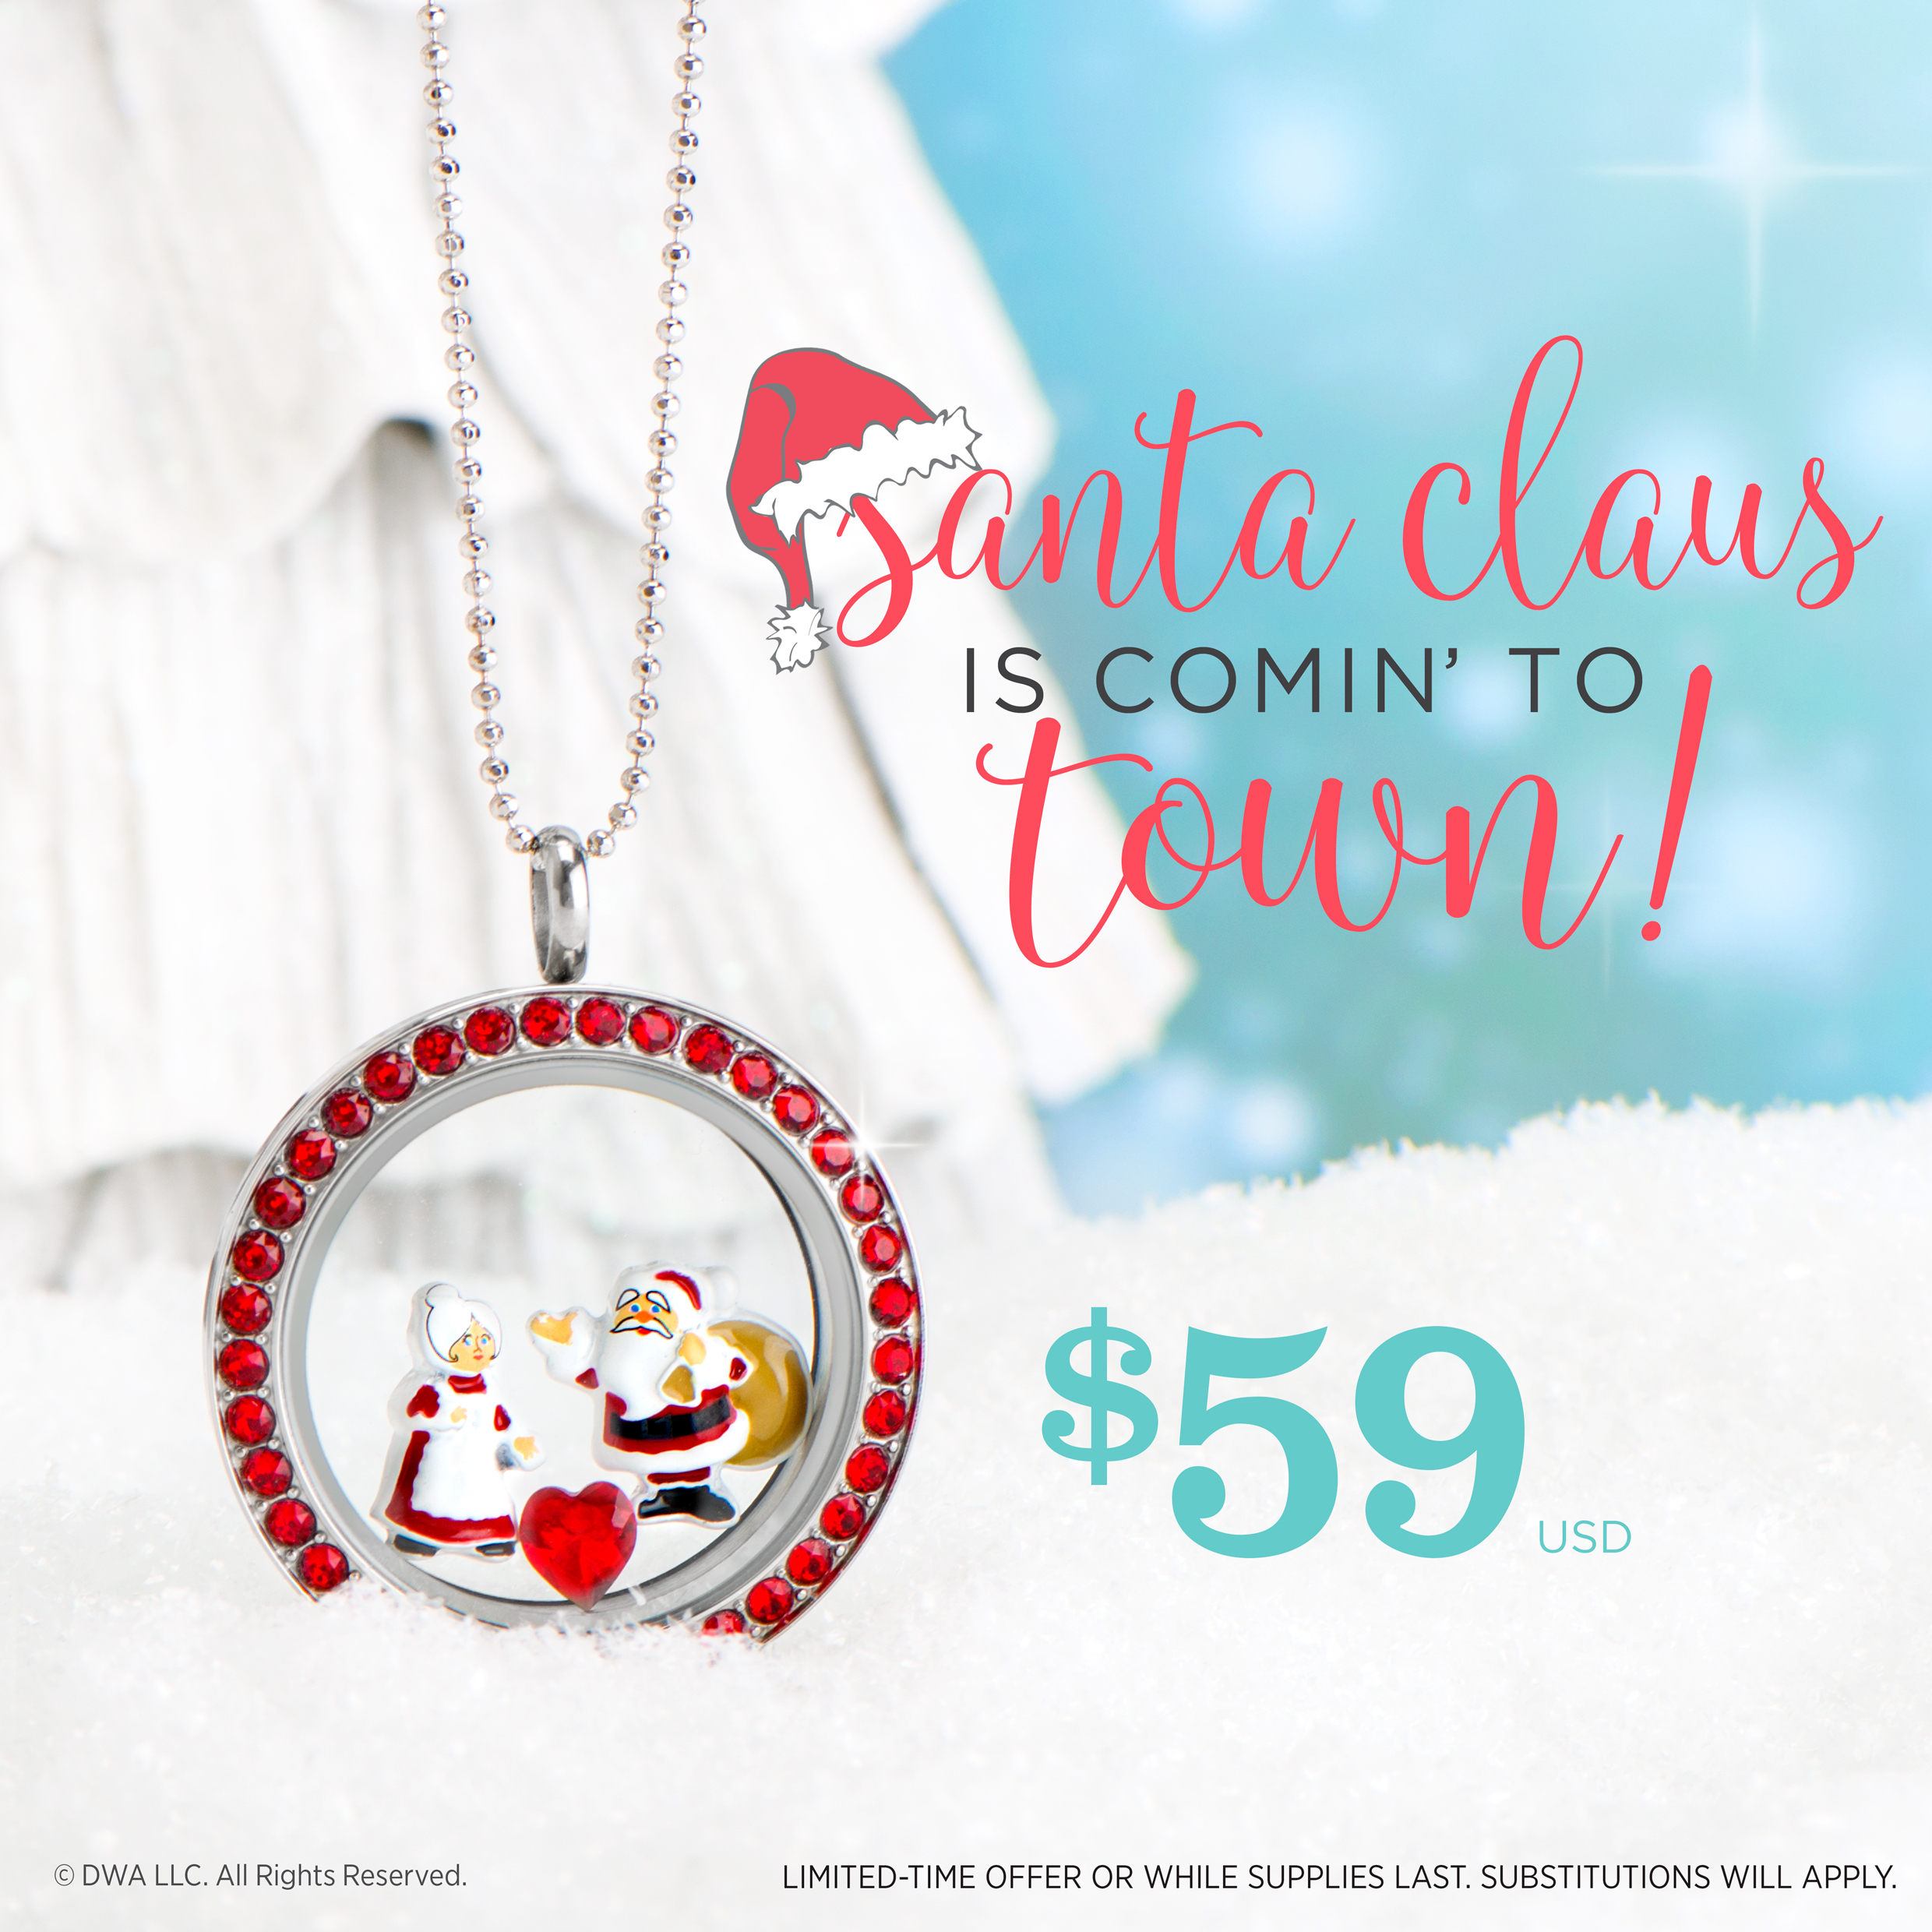 Origami Owl Free Shipping New Limited Time Holiday Jewelry Coming To Town Free Shipping